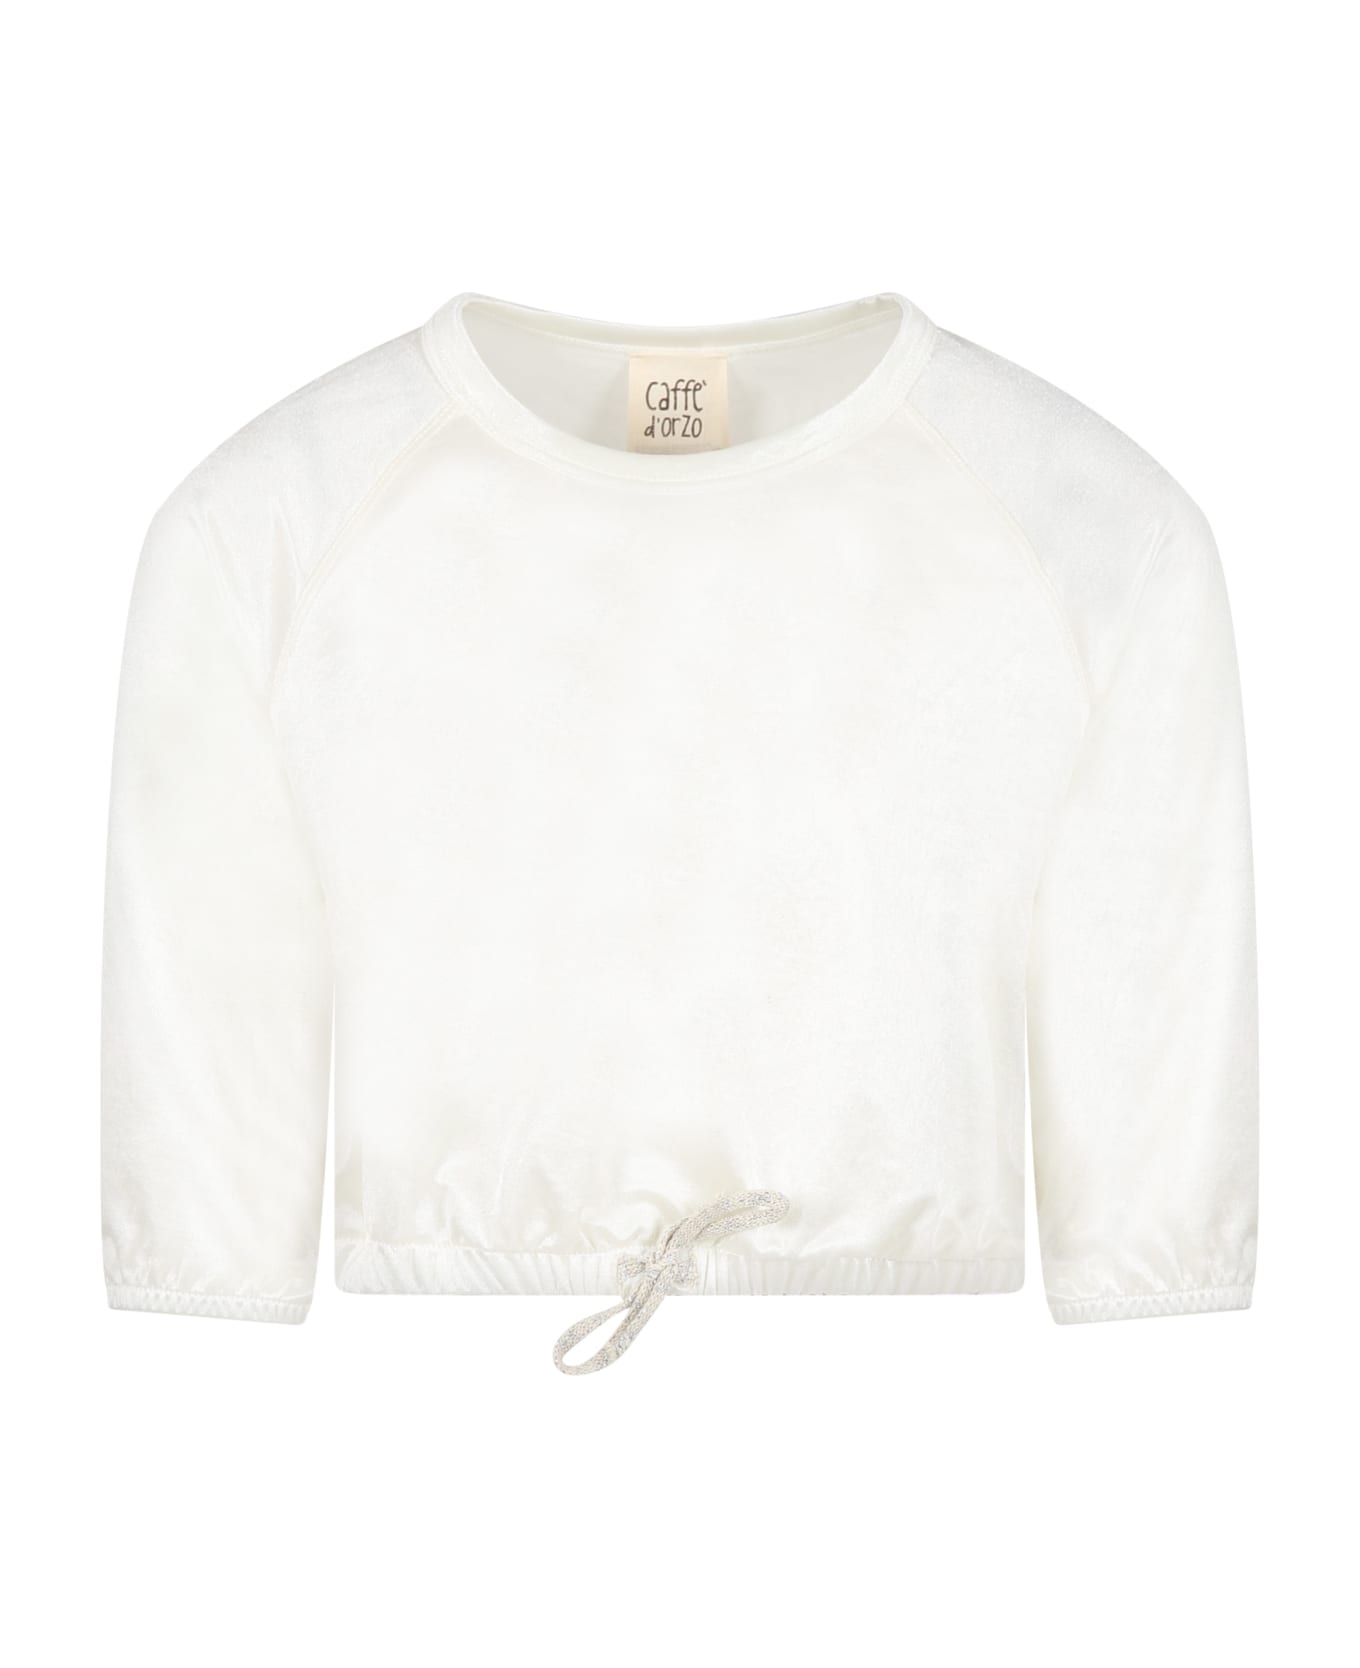 Caffe' d'Orzo Ivory Sweatshirt For Girl - Ivory